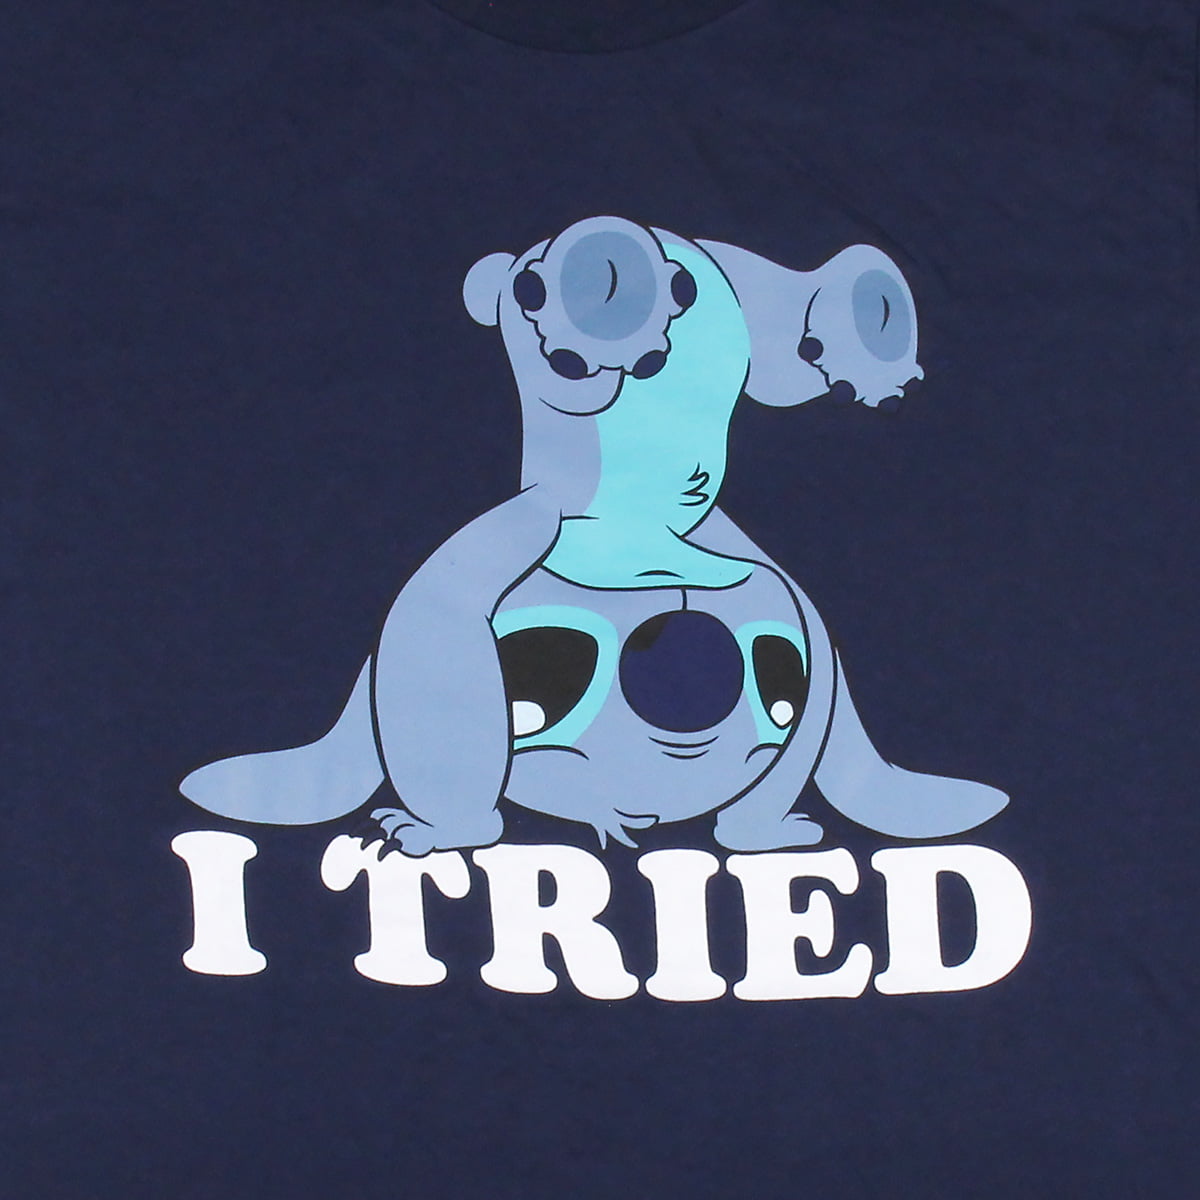 Disney Lilo & Stitch Relaxing In Chair Mood T-Shirt.pngDisne - Inspire  Uplift